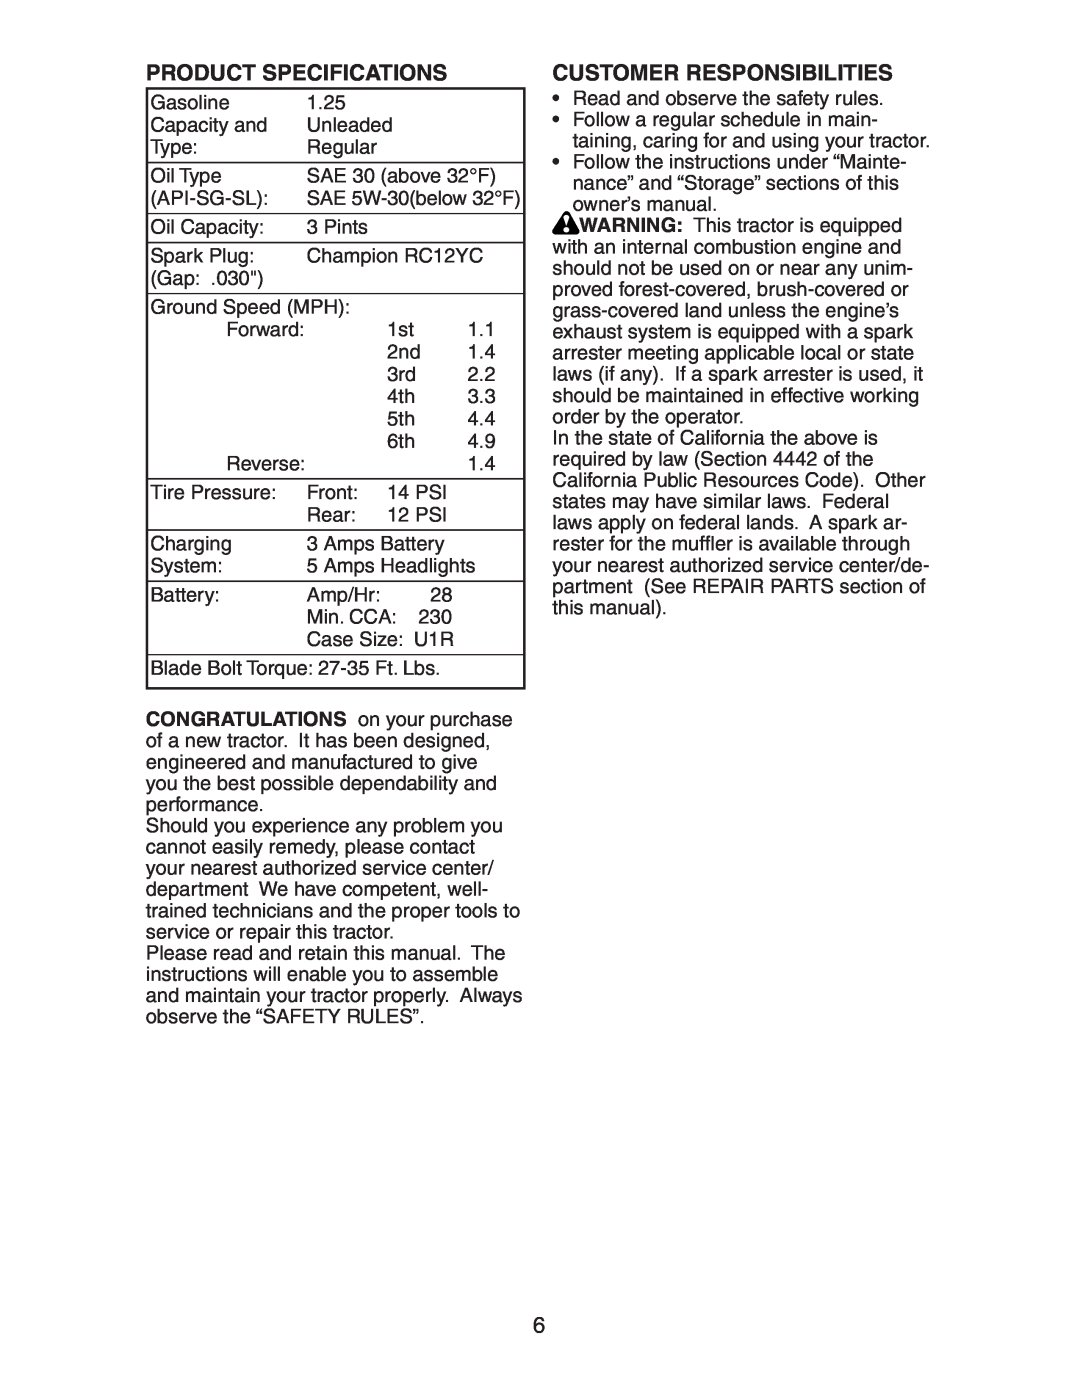 Poulan AG17542STB manual Product Specifications, Customer Responsibilities 